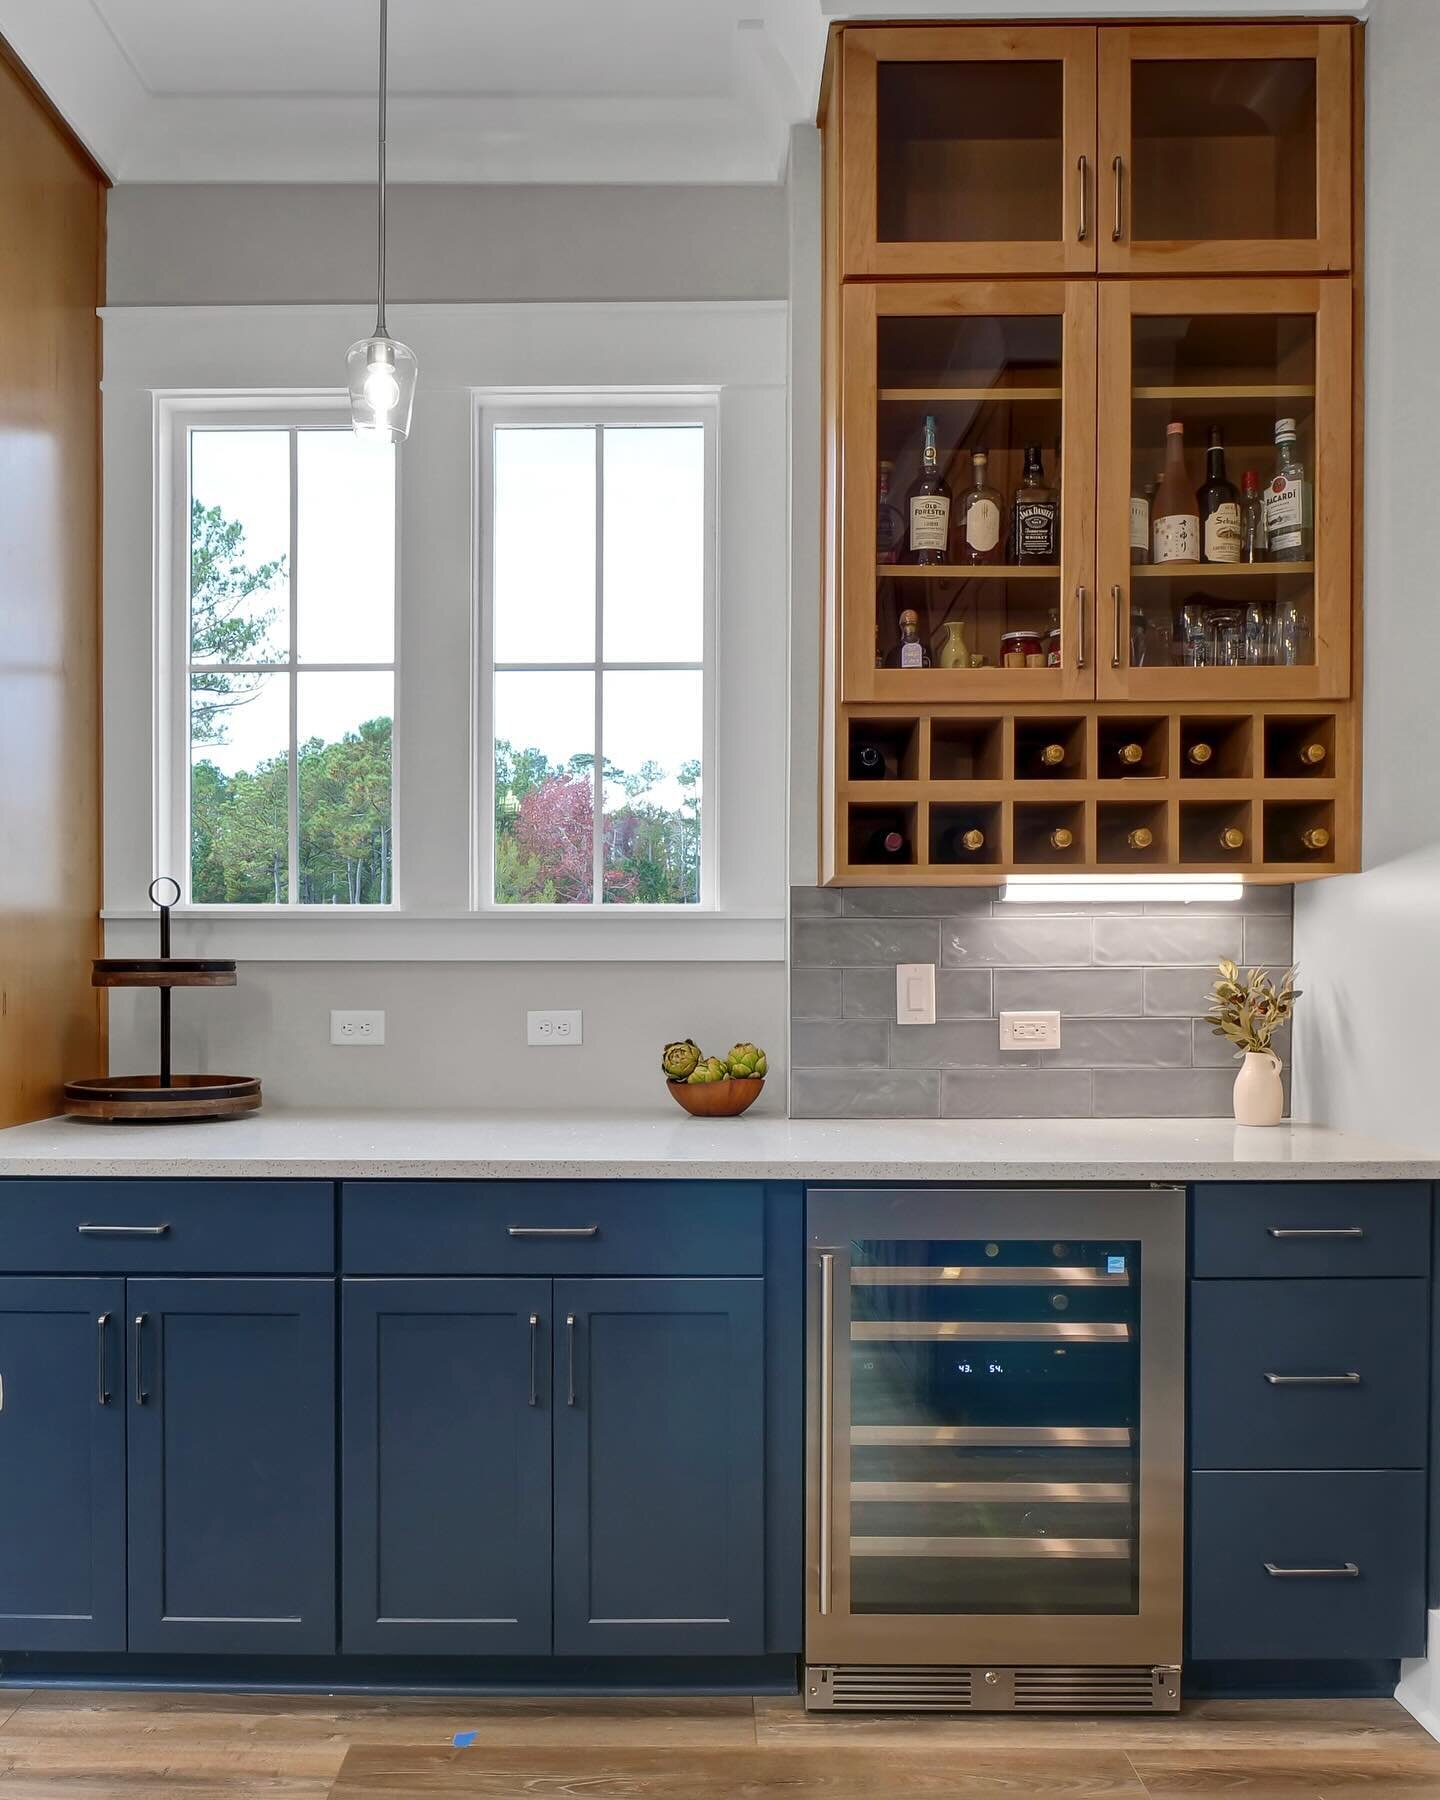 Beautiful cabinetry sets the scene for your every day life. Don&rsquo;t be afraid to pair color with stain to truly elevate your kitchen experience. 

Our passion is designing spaces that focus on how you want to live, whether it&rsquo;s a small foot